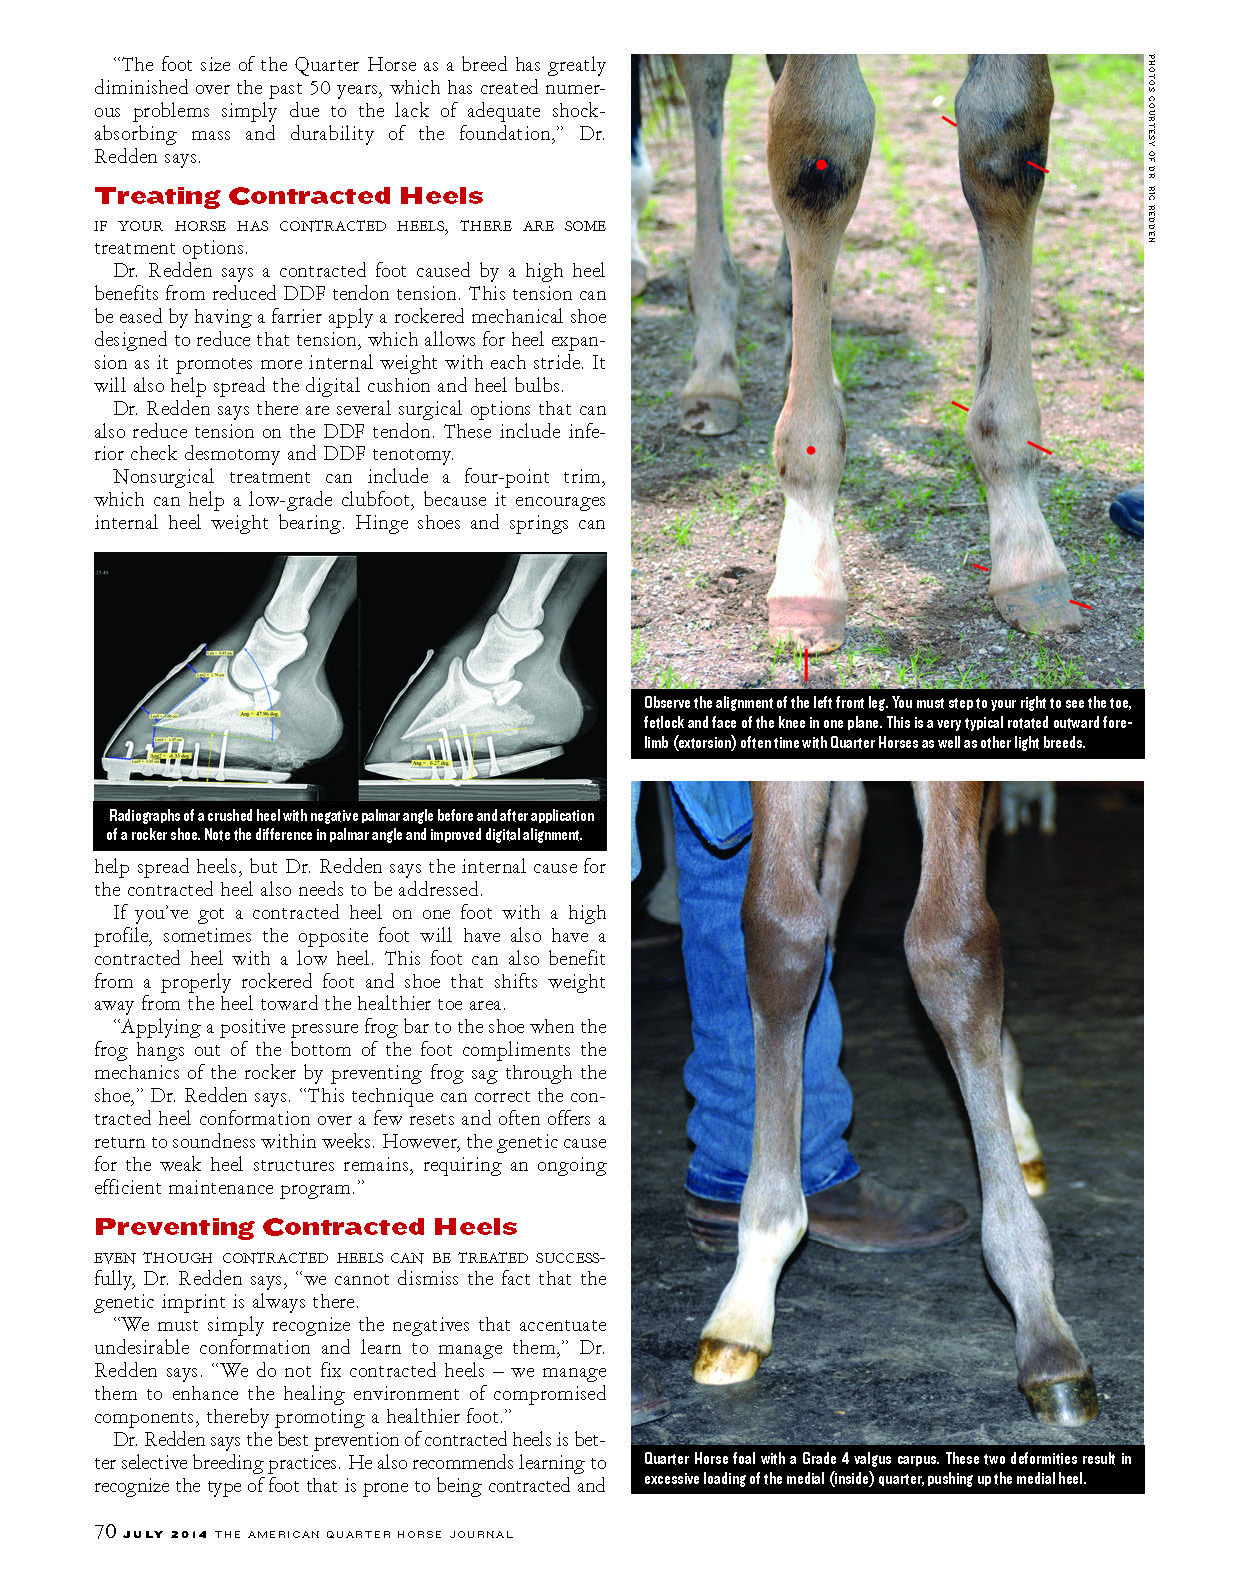 Horse Conformation Determines Best Trimming and Shoeing Approaches